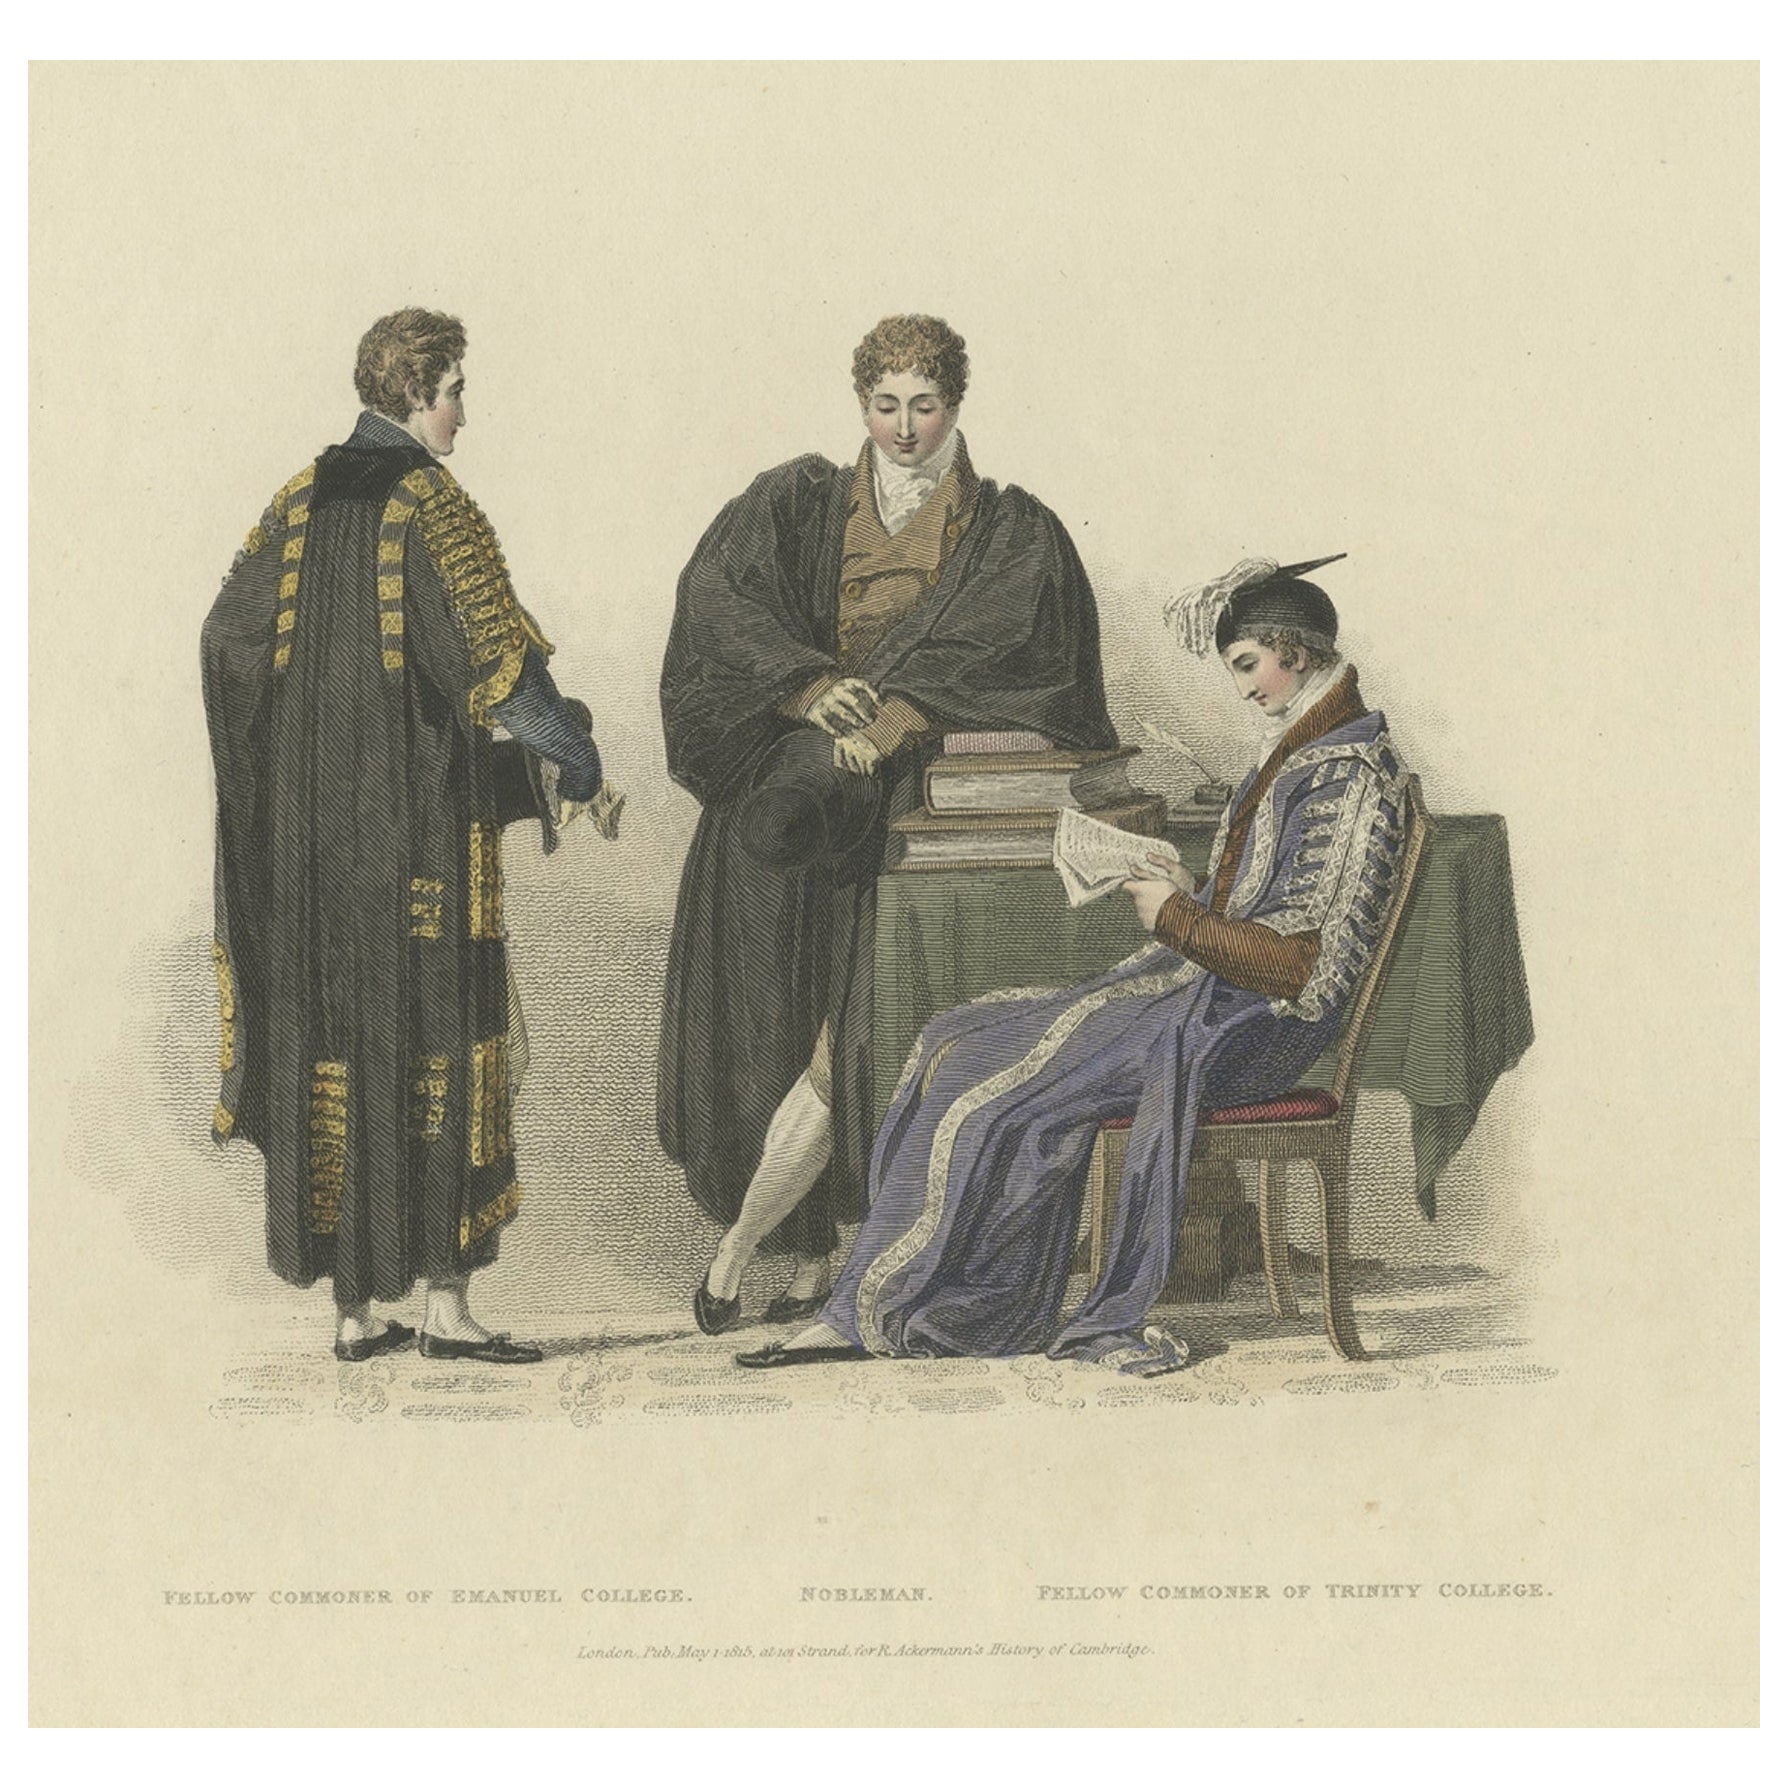 Old Print of Nobleman and Fellow-Commoners of Trinity and Emanuel College, 1815